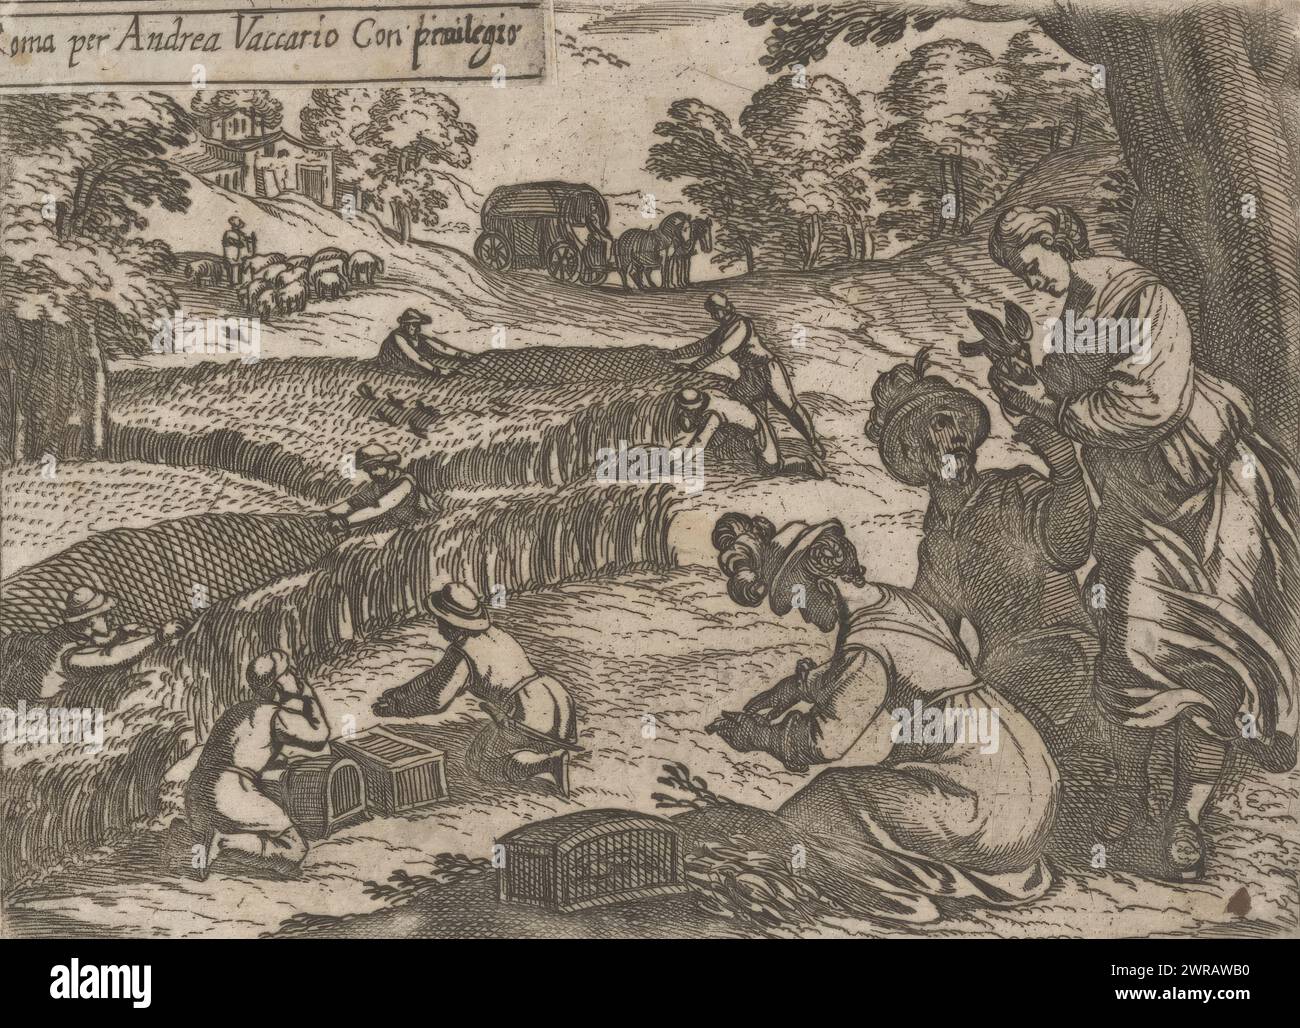 Hunters catch small birds in the tall grass, Hunting scenes (part 2) (series title), Primo libro di caccie varie (series title), Landscape with hunters who catch small birds in the tall grass with the help of nets and cages. In the foreground a man and two women with the captured birds., print maker: Antonio Tempesta, publisher: Andrea Vaccari, (possibly), publisher: Giovanni Orlandi, (possibly), print maker: Italy, publisher: Rome, publisher: Rome, Vatican City, 1598, paper, etching, height 101 mm × width 140 mm, print Stock Photo